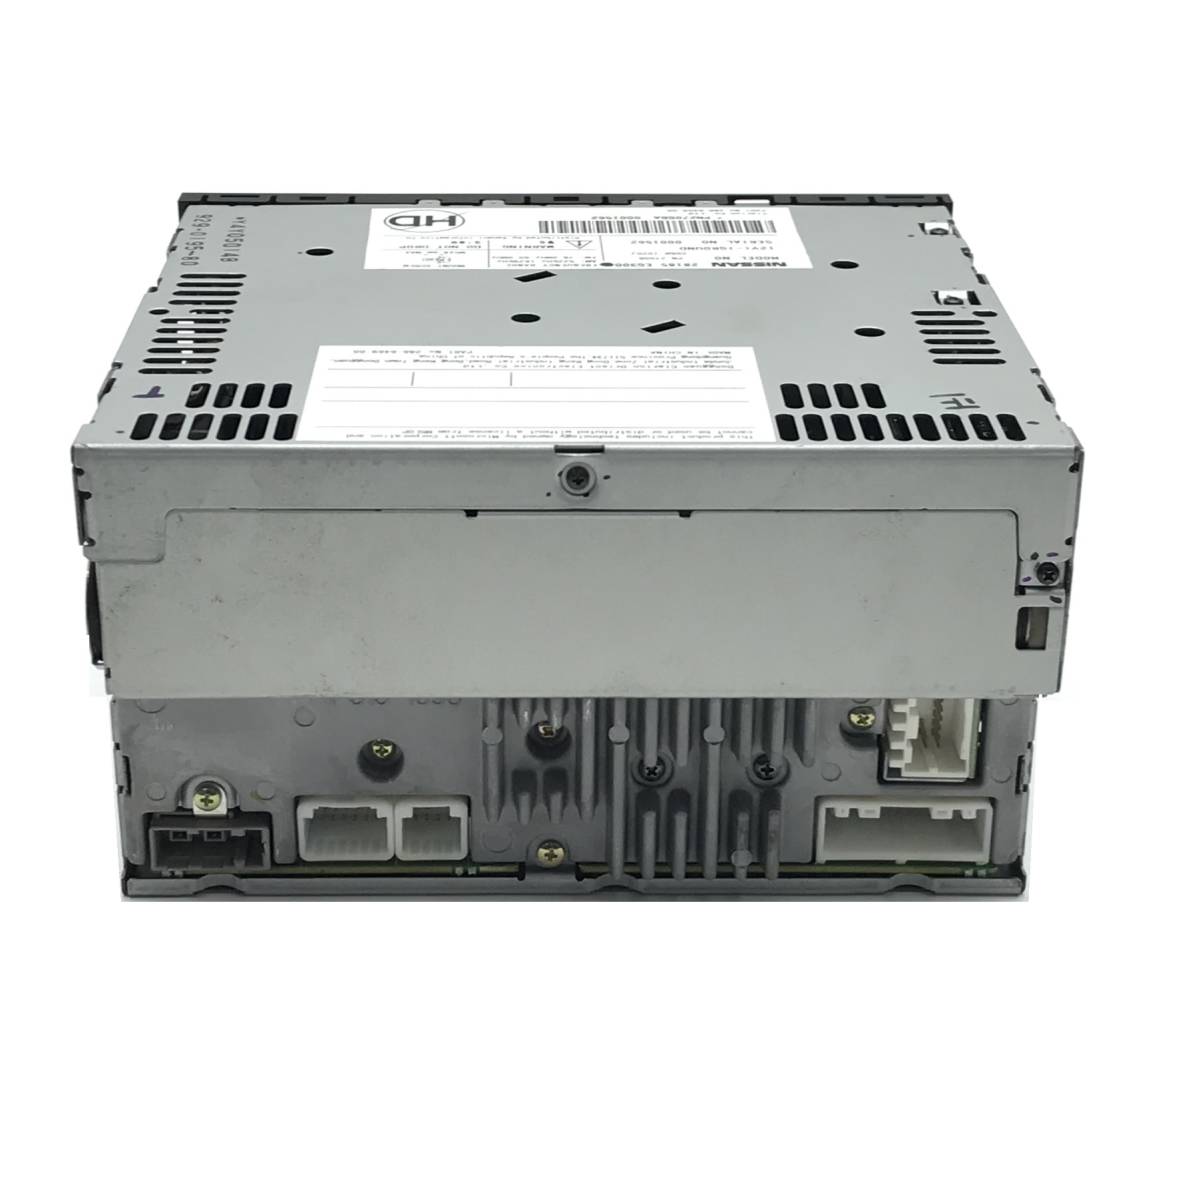  operation OK superior article! Fuga GY50 Y50 PY50 PNY50 Y50 previous term BOSE Bose original CD changer PN-2700B 28185-EG300